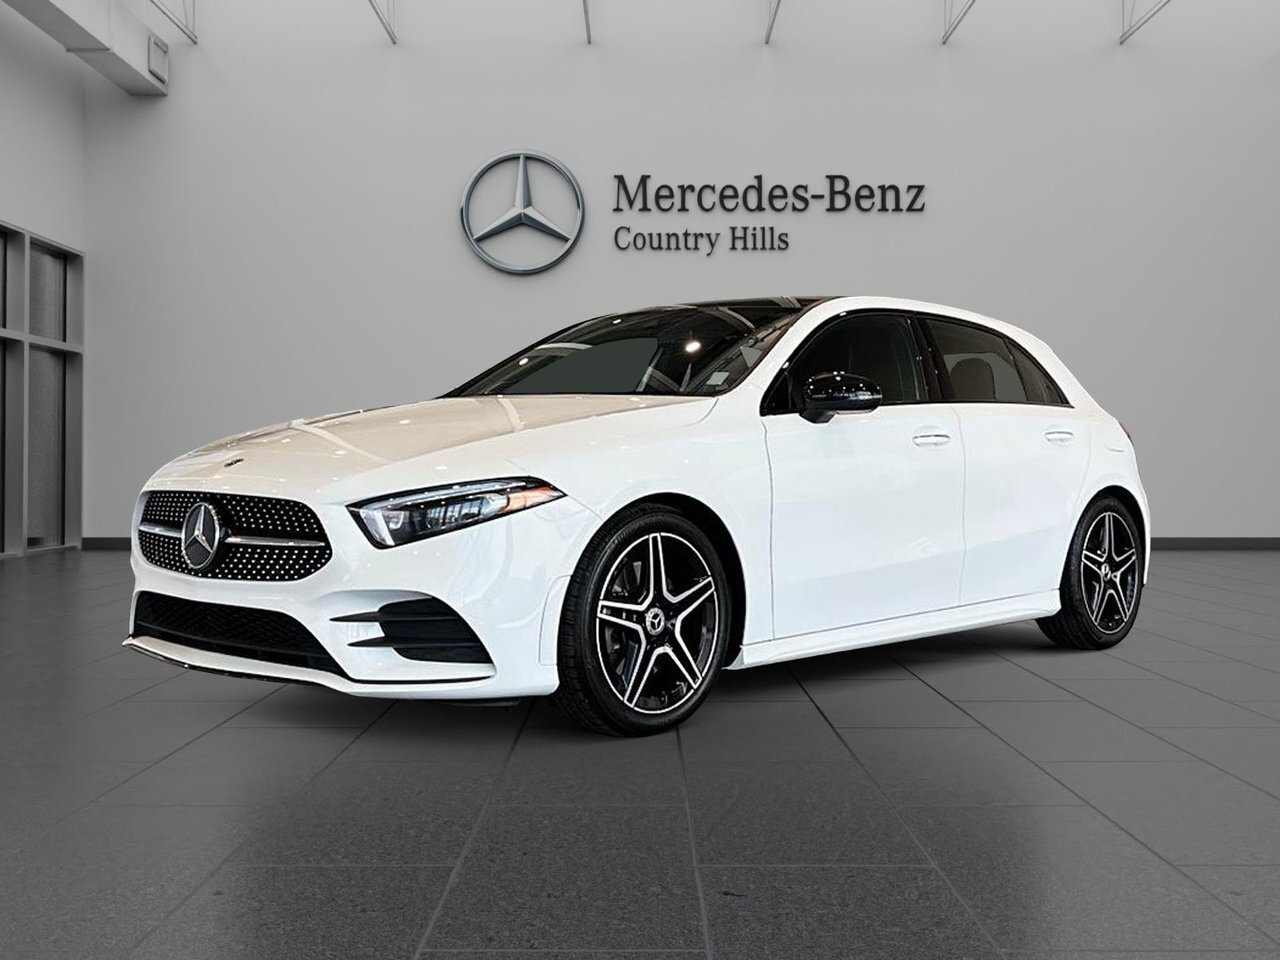 2021 Mercedes-Benz A250 4MATIC Hatch Extended warranty! Highly equipped!